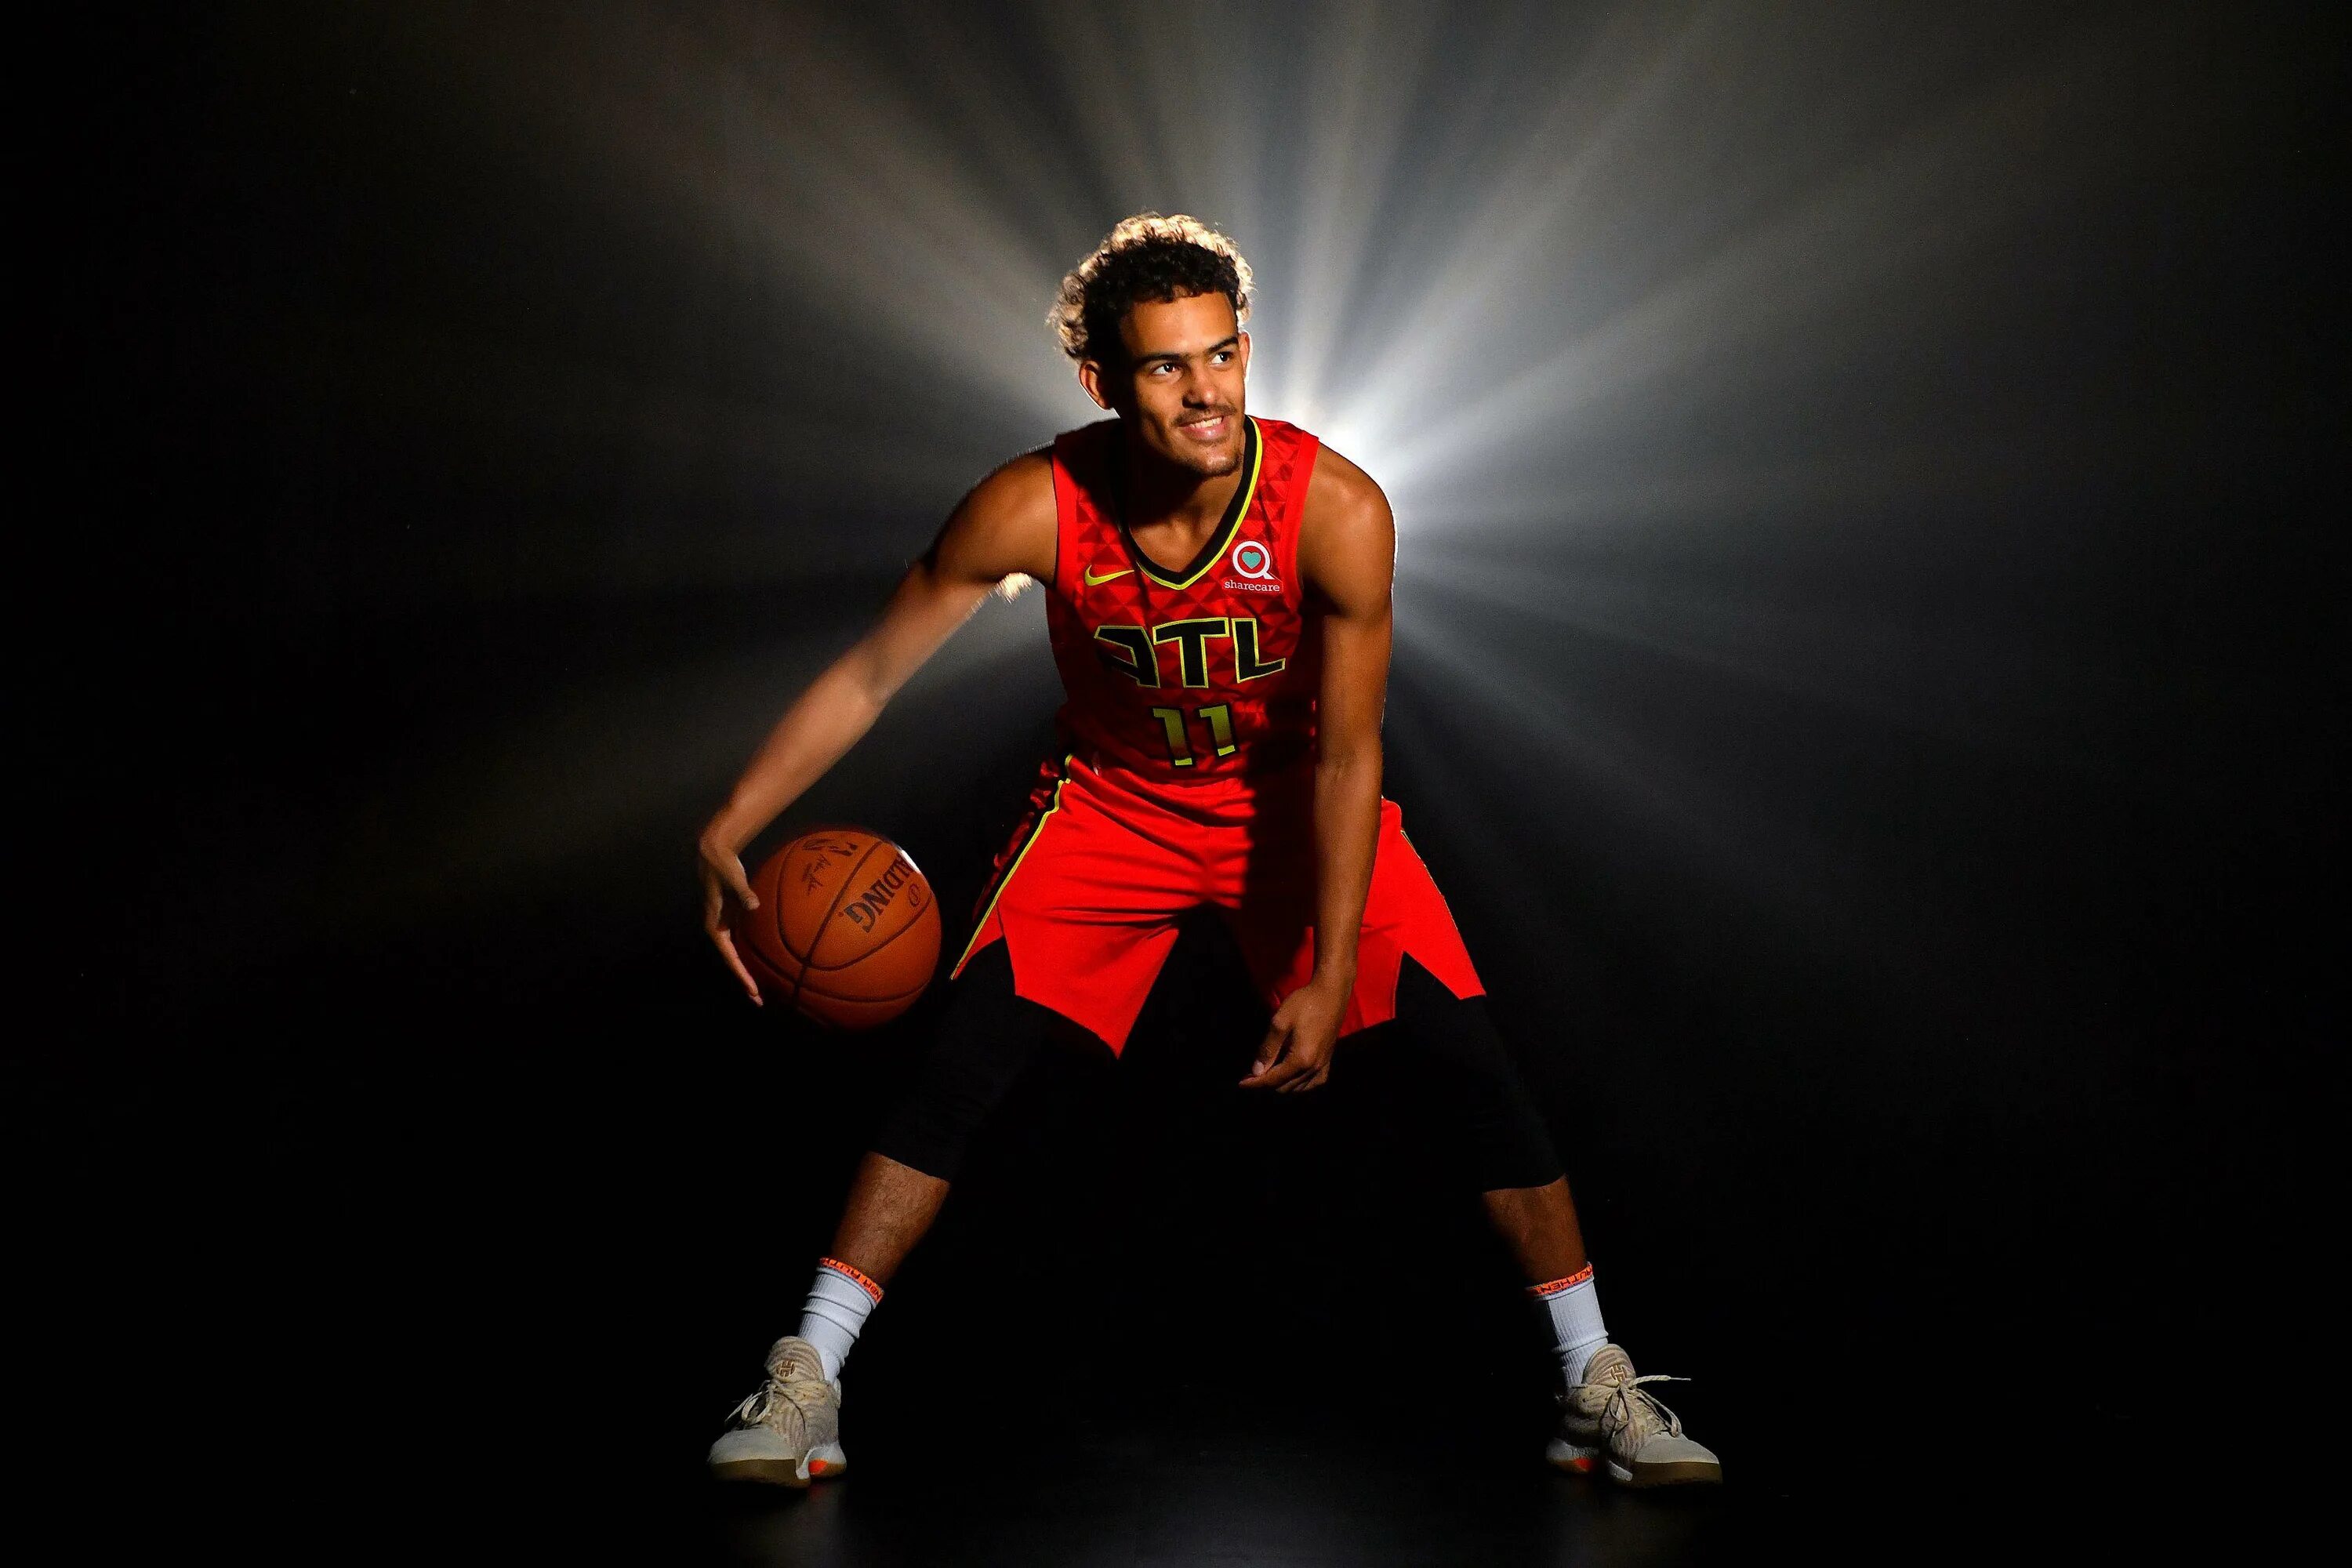 Трэйянги. Trae young обои. Trae young 1 Wallpaper.